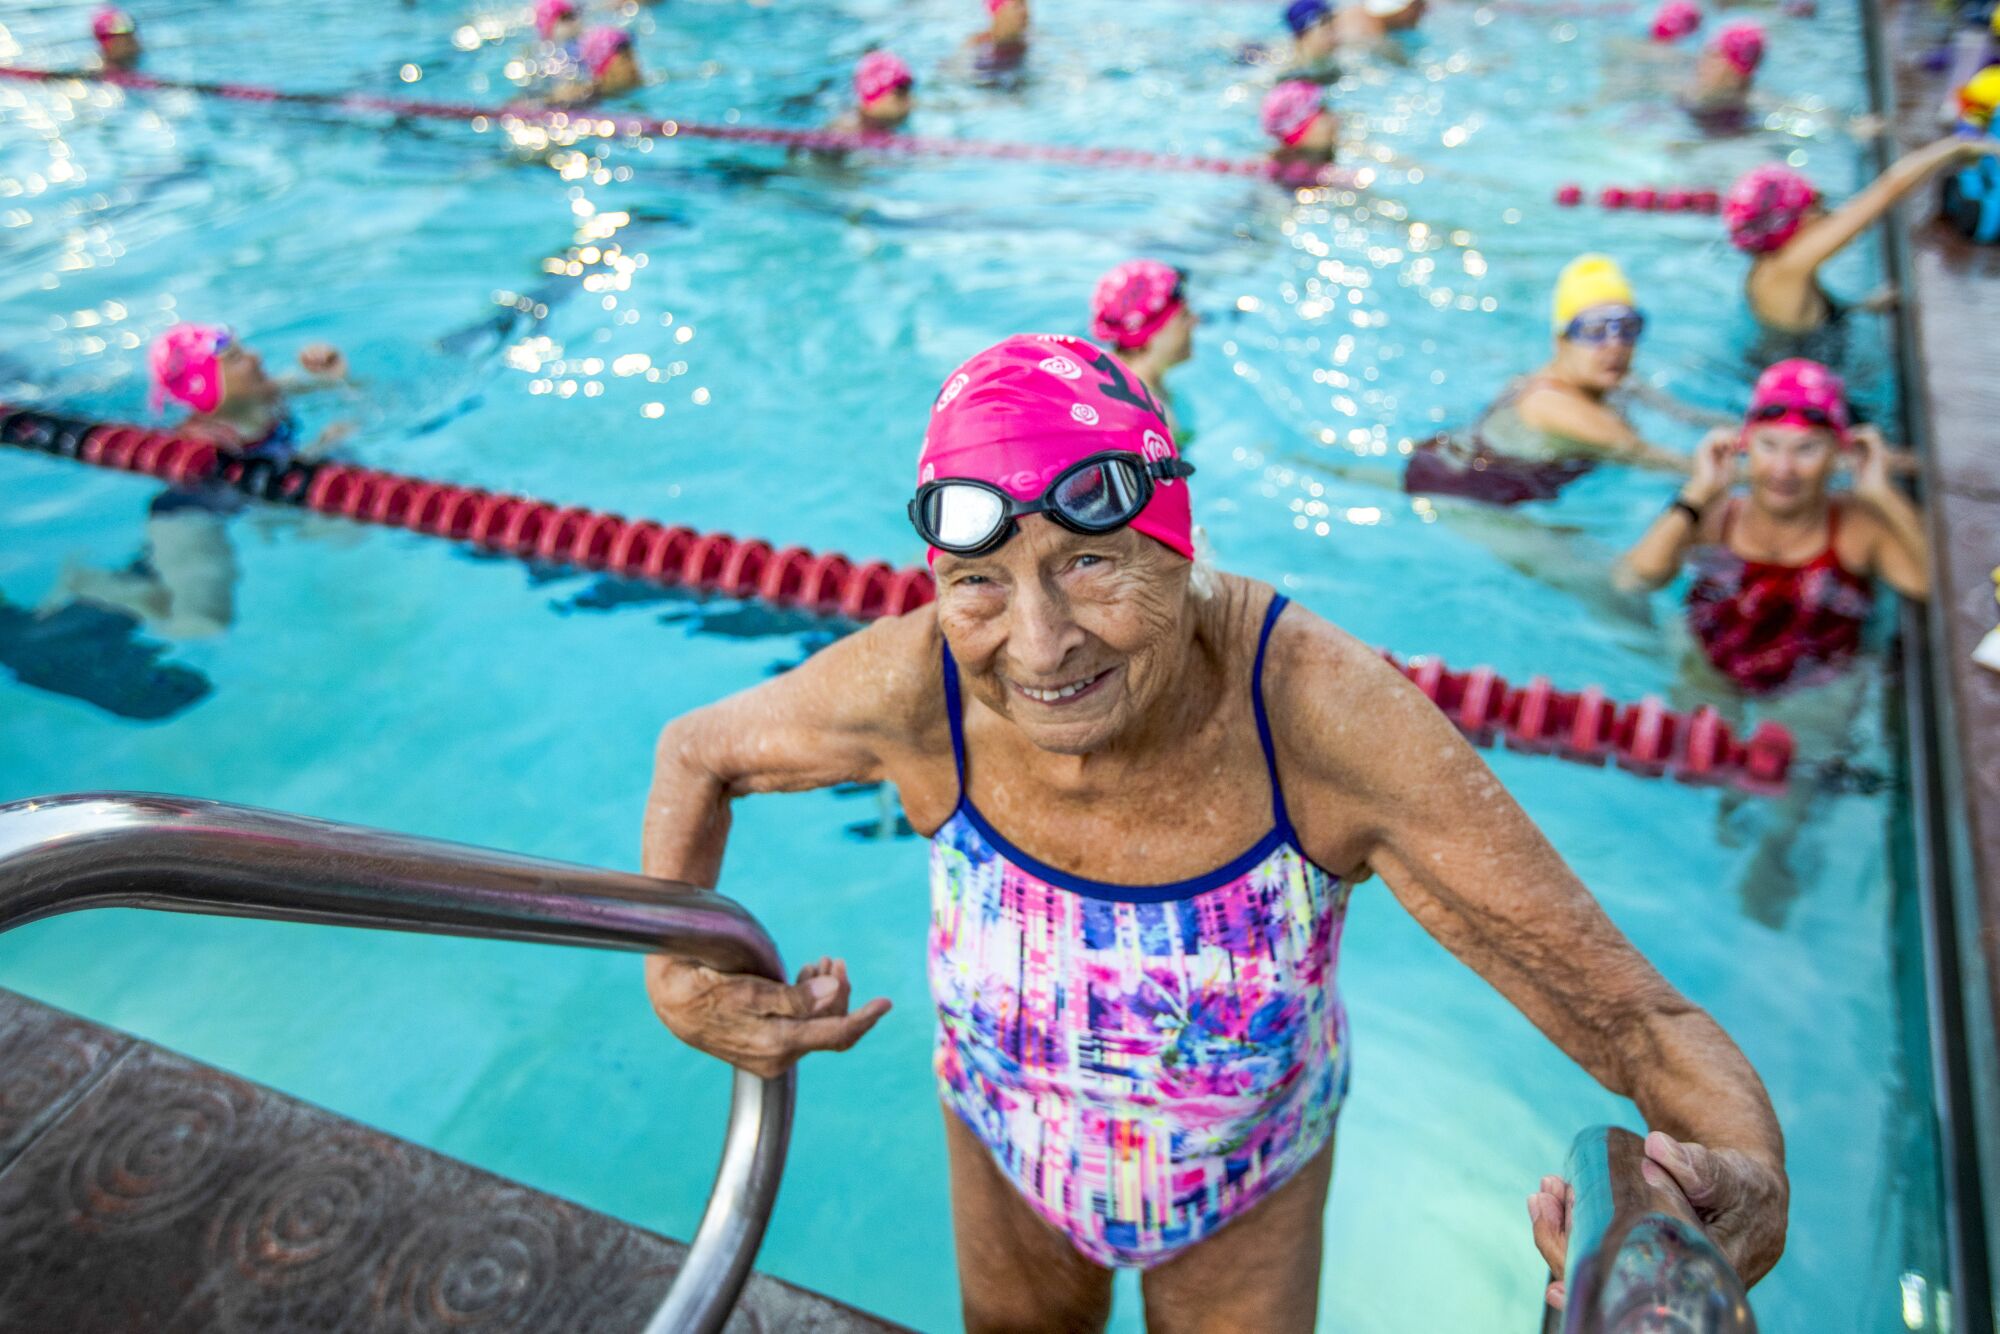 A 100-year-old woman in a multicolored bathing suit stands at the edge of a pool where other swimmers are in the water